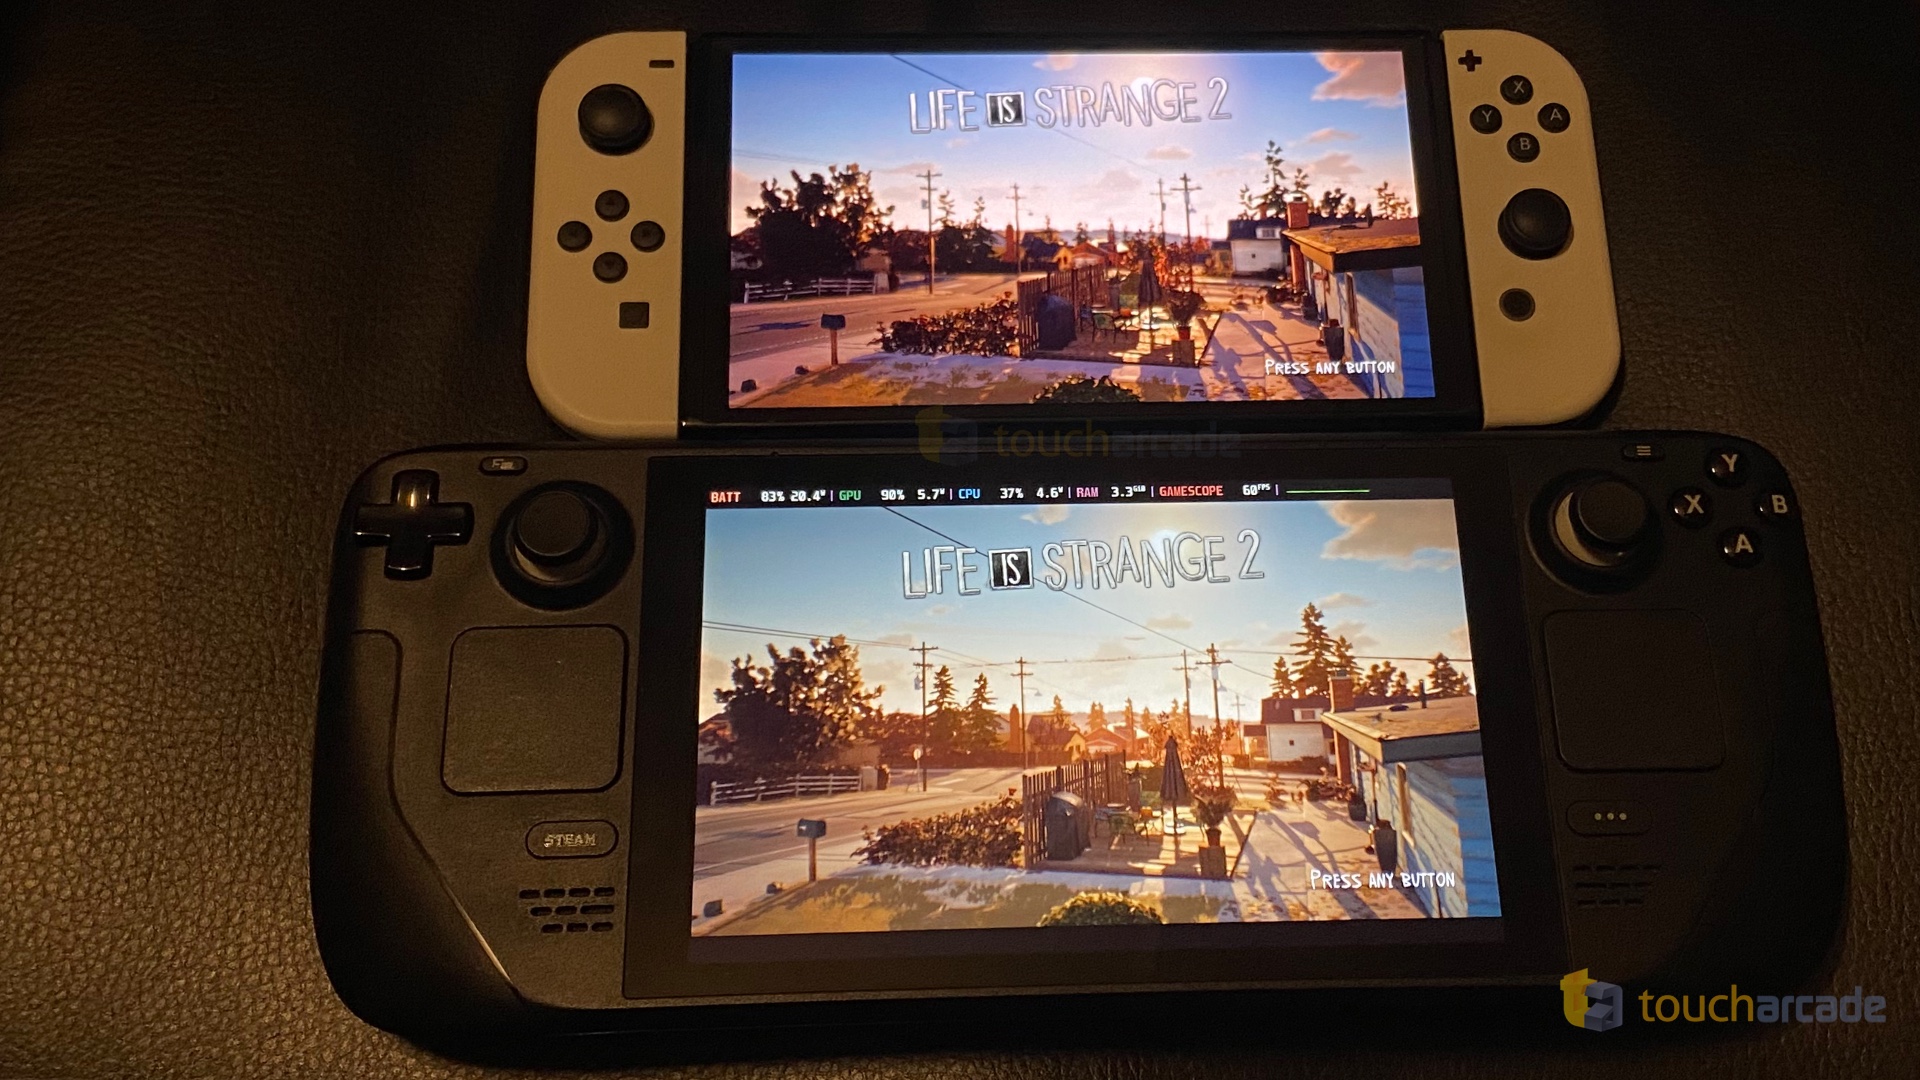 Reviews Featuring ‘Life is Strange 2’, Plus the Latest Releases and Sales – TouchArcade